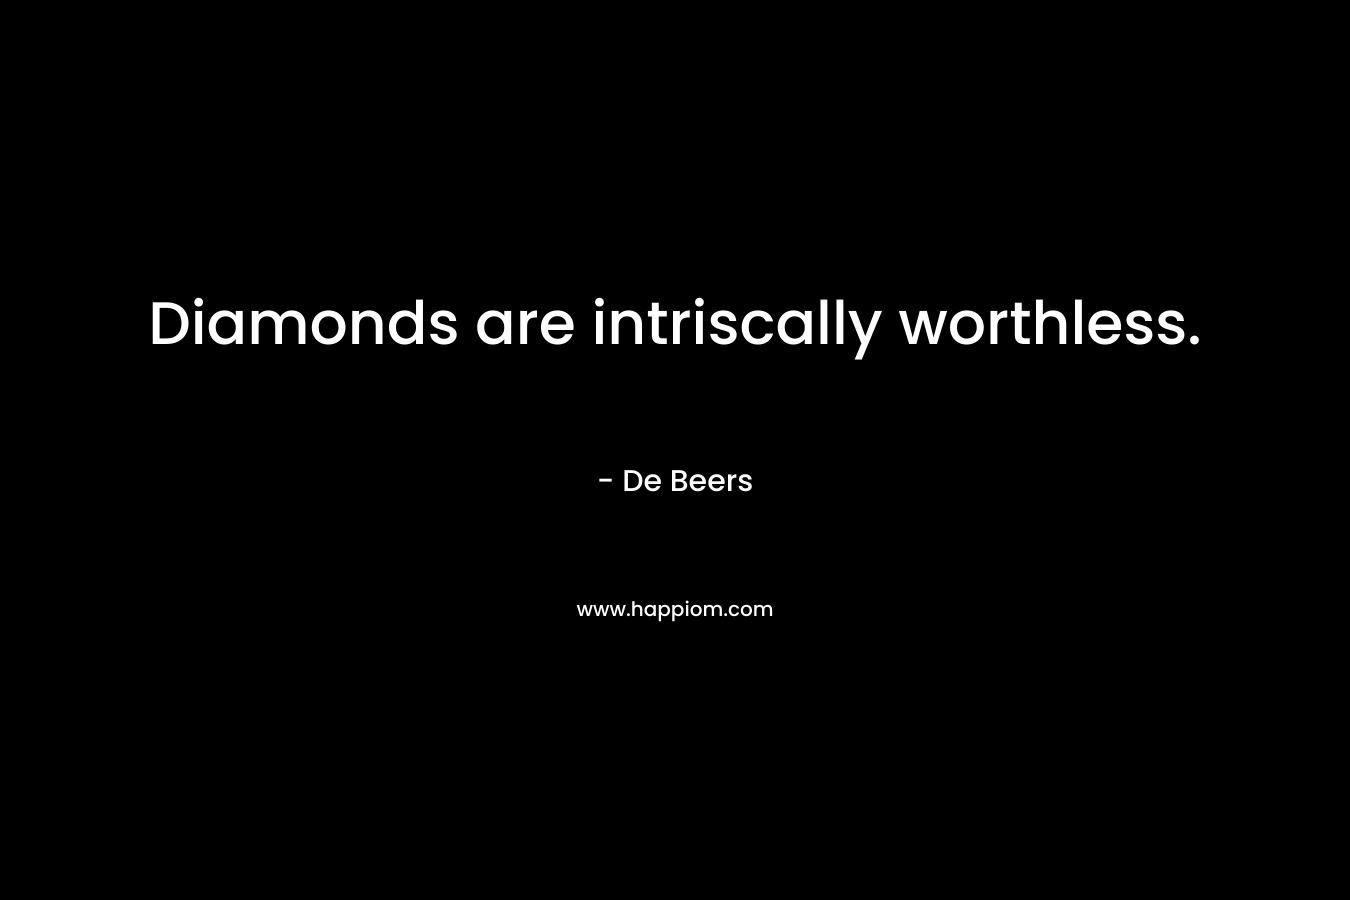 Diamonds are intriscally worthless. – De Beers